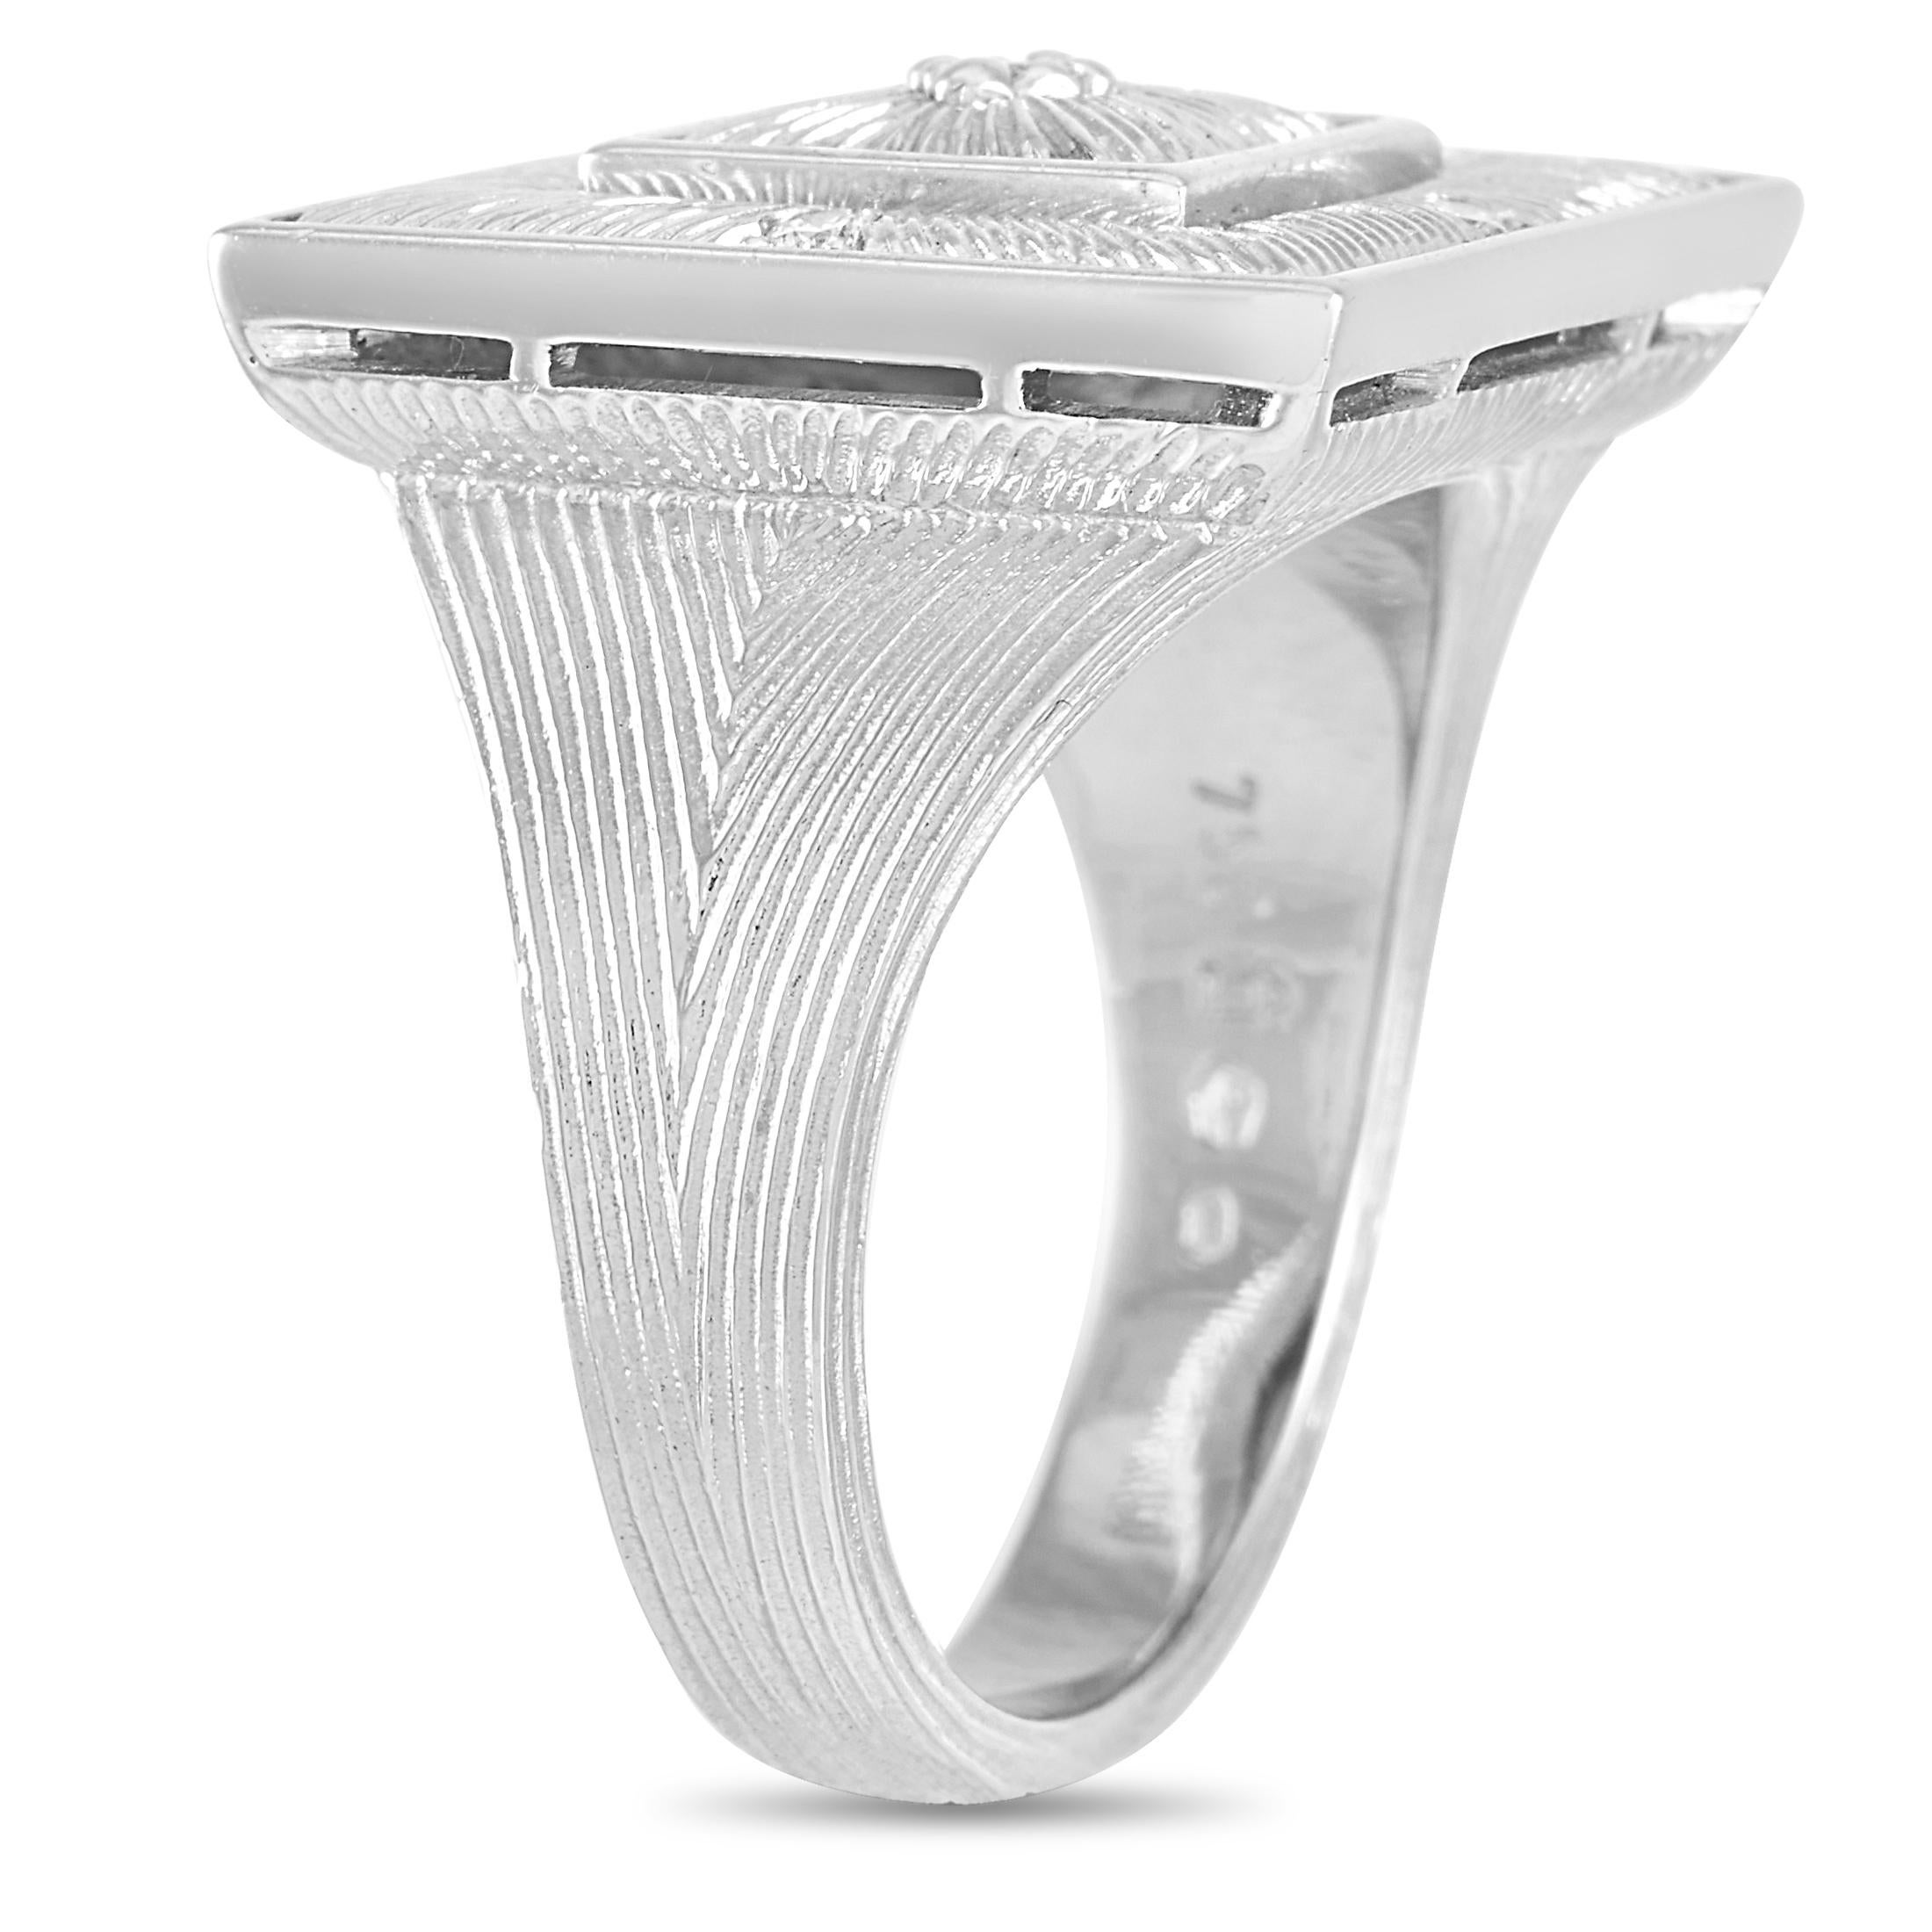 A striking square design makes this exquisite style from Buccellati a piece that is both confident and captivating. With an appearance that references Art Deco design, the top is covered with textured 18K White Gold that is accented by diamonds